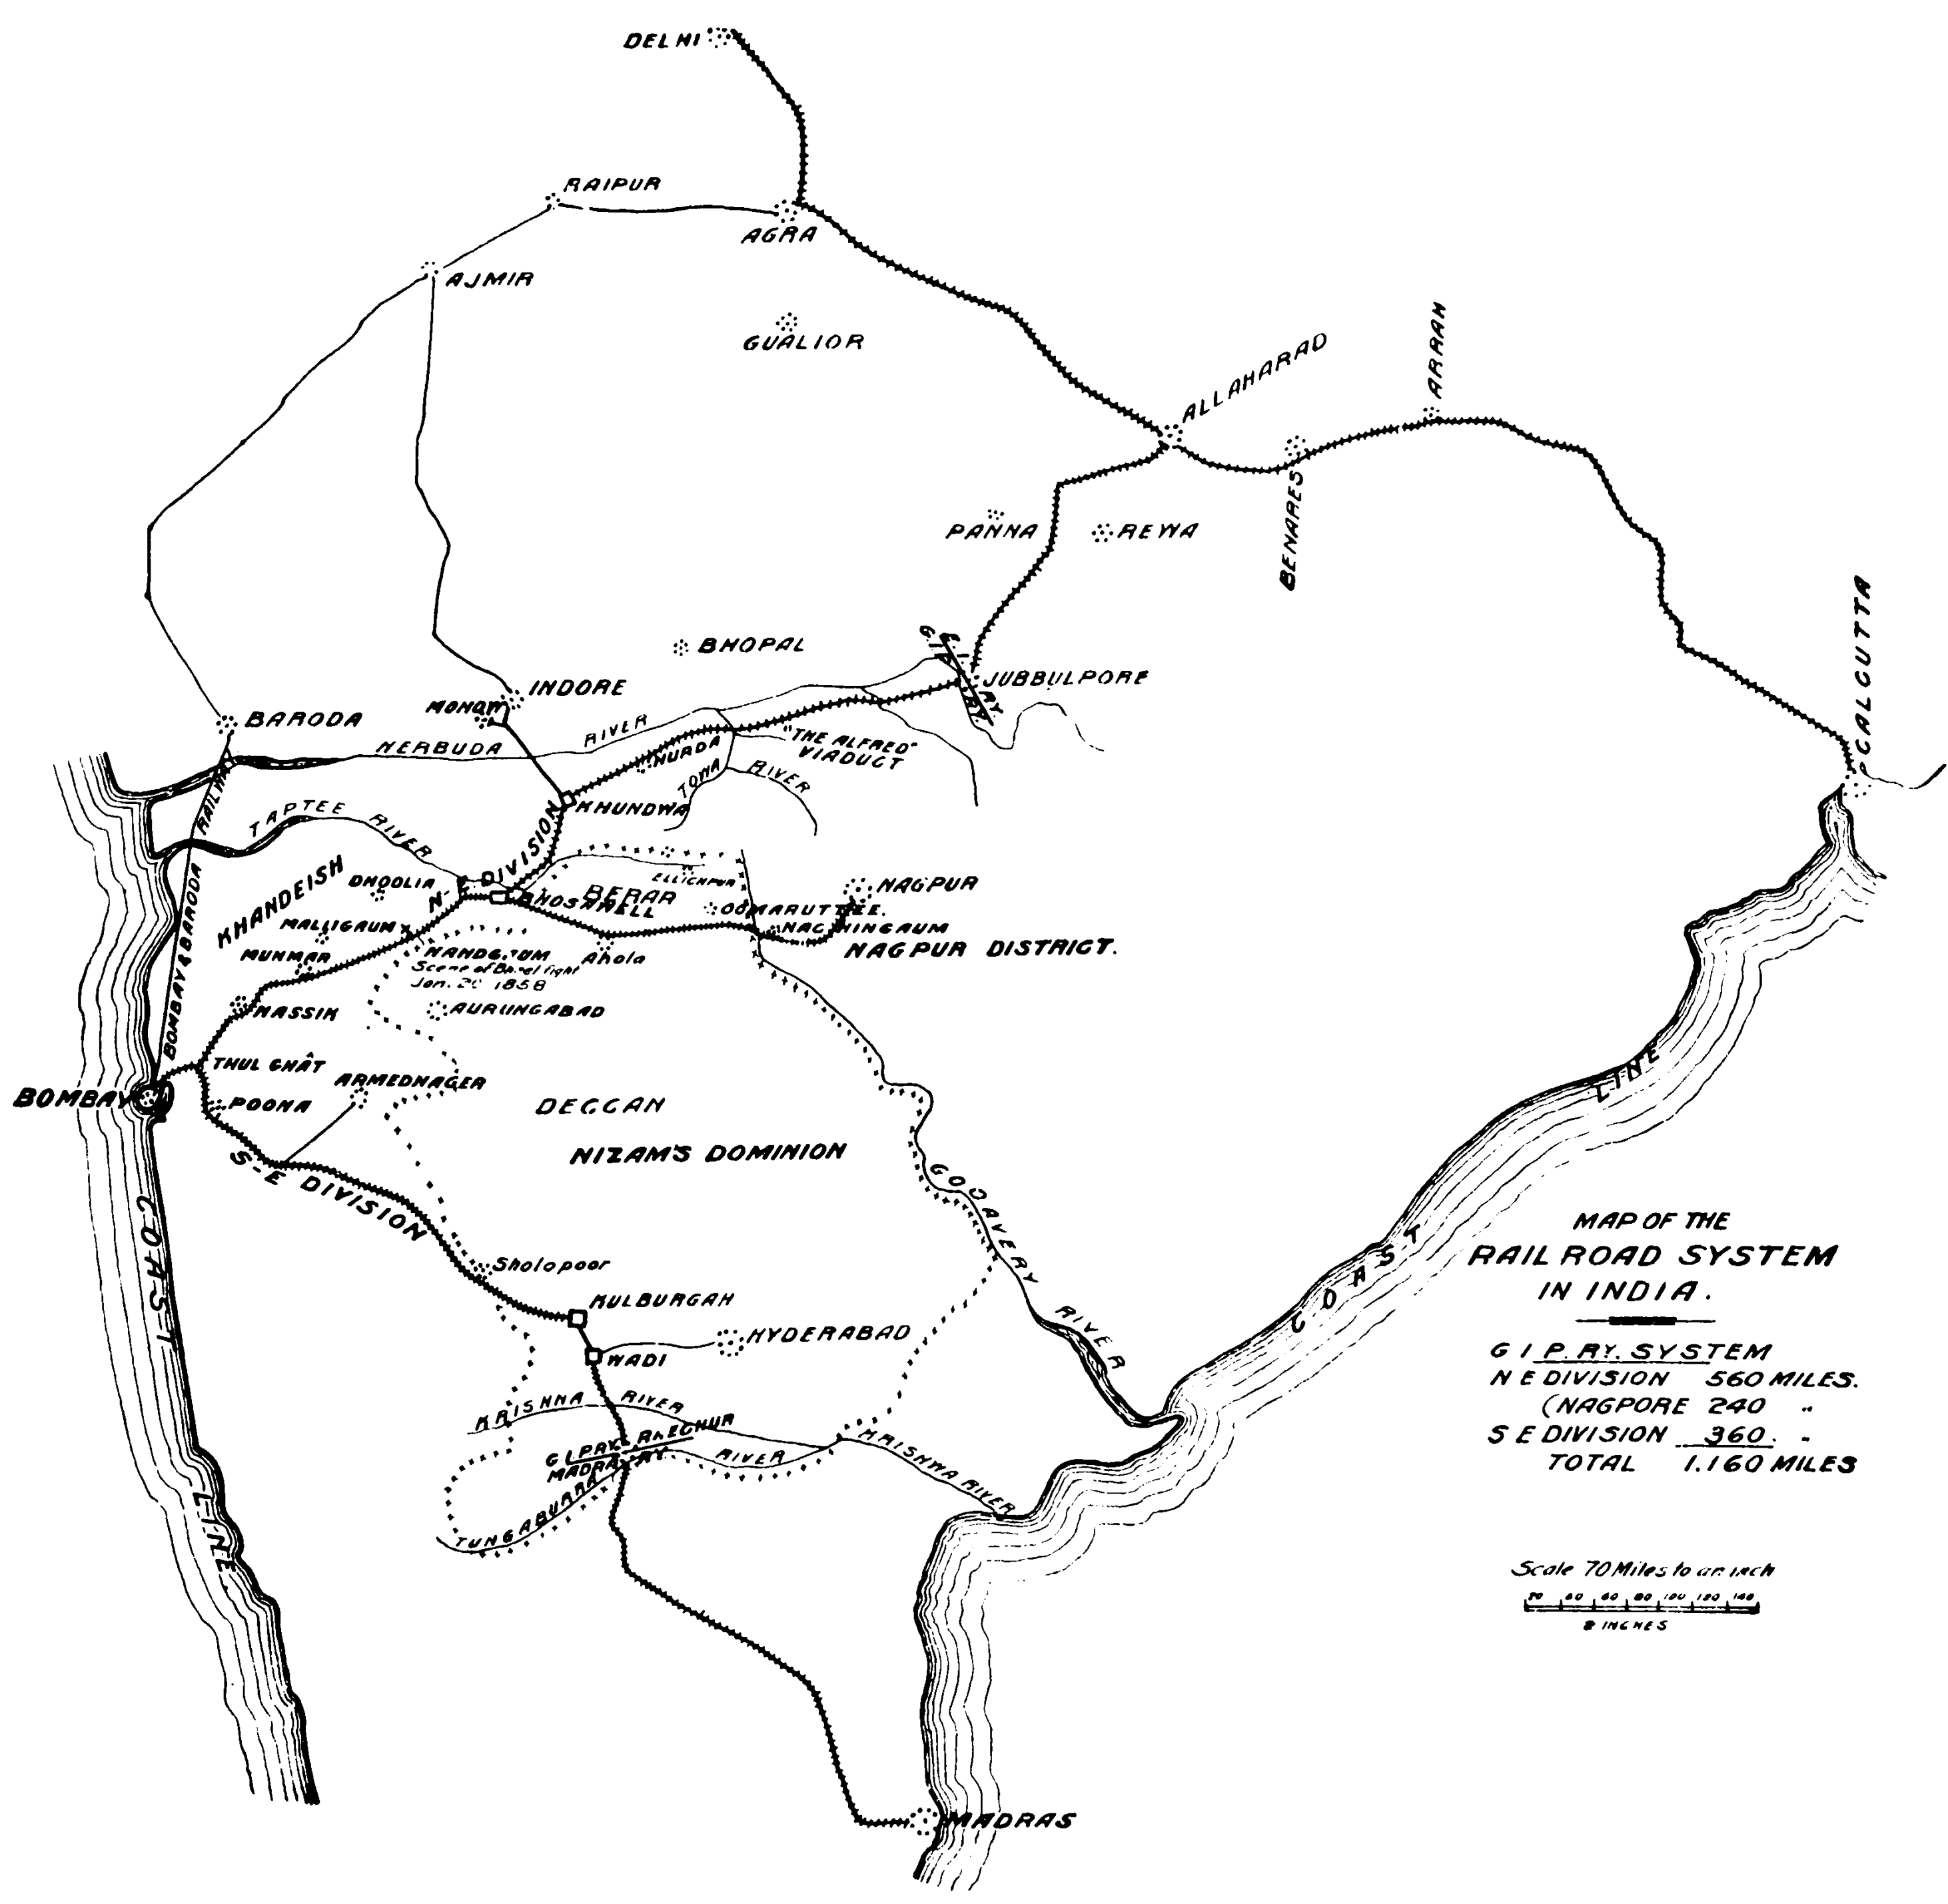 india-railways-in-1870.png